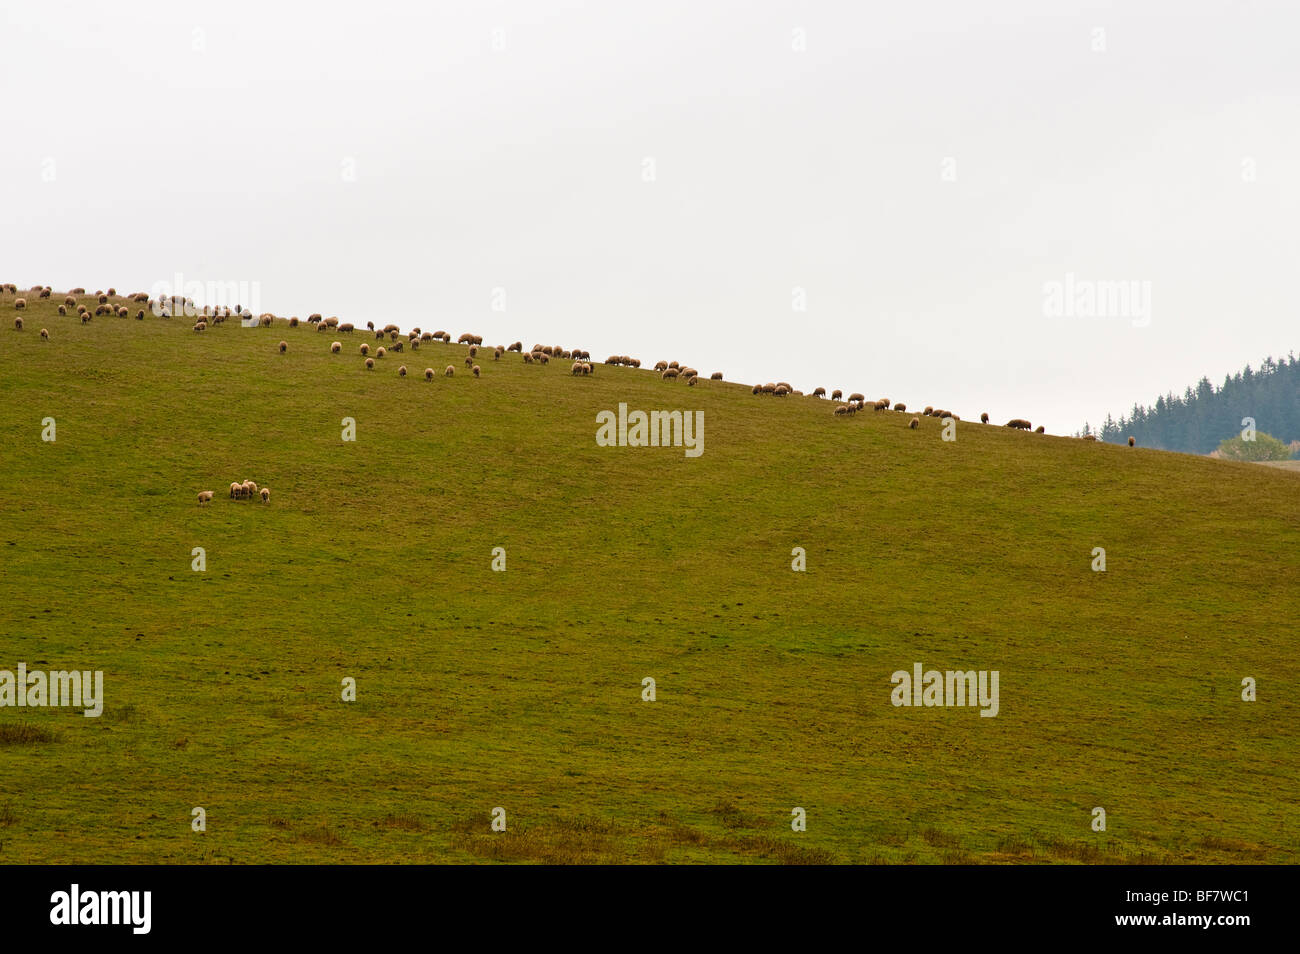 Sheep on a green hill with white cloudy sky Stock Photo